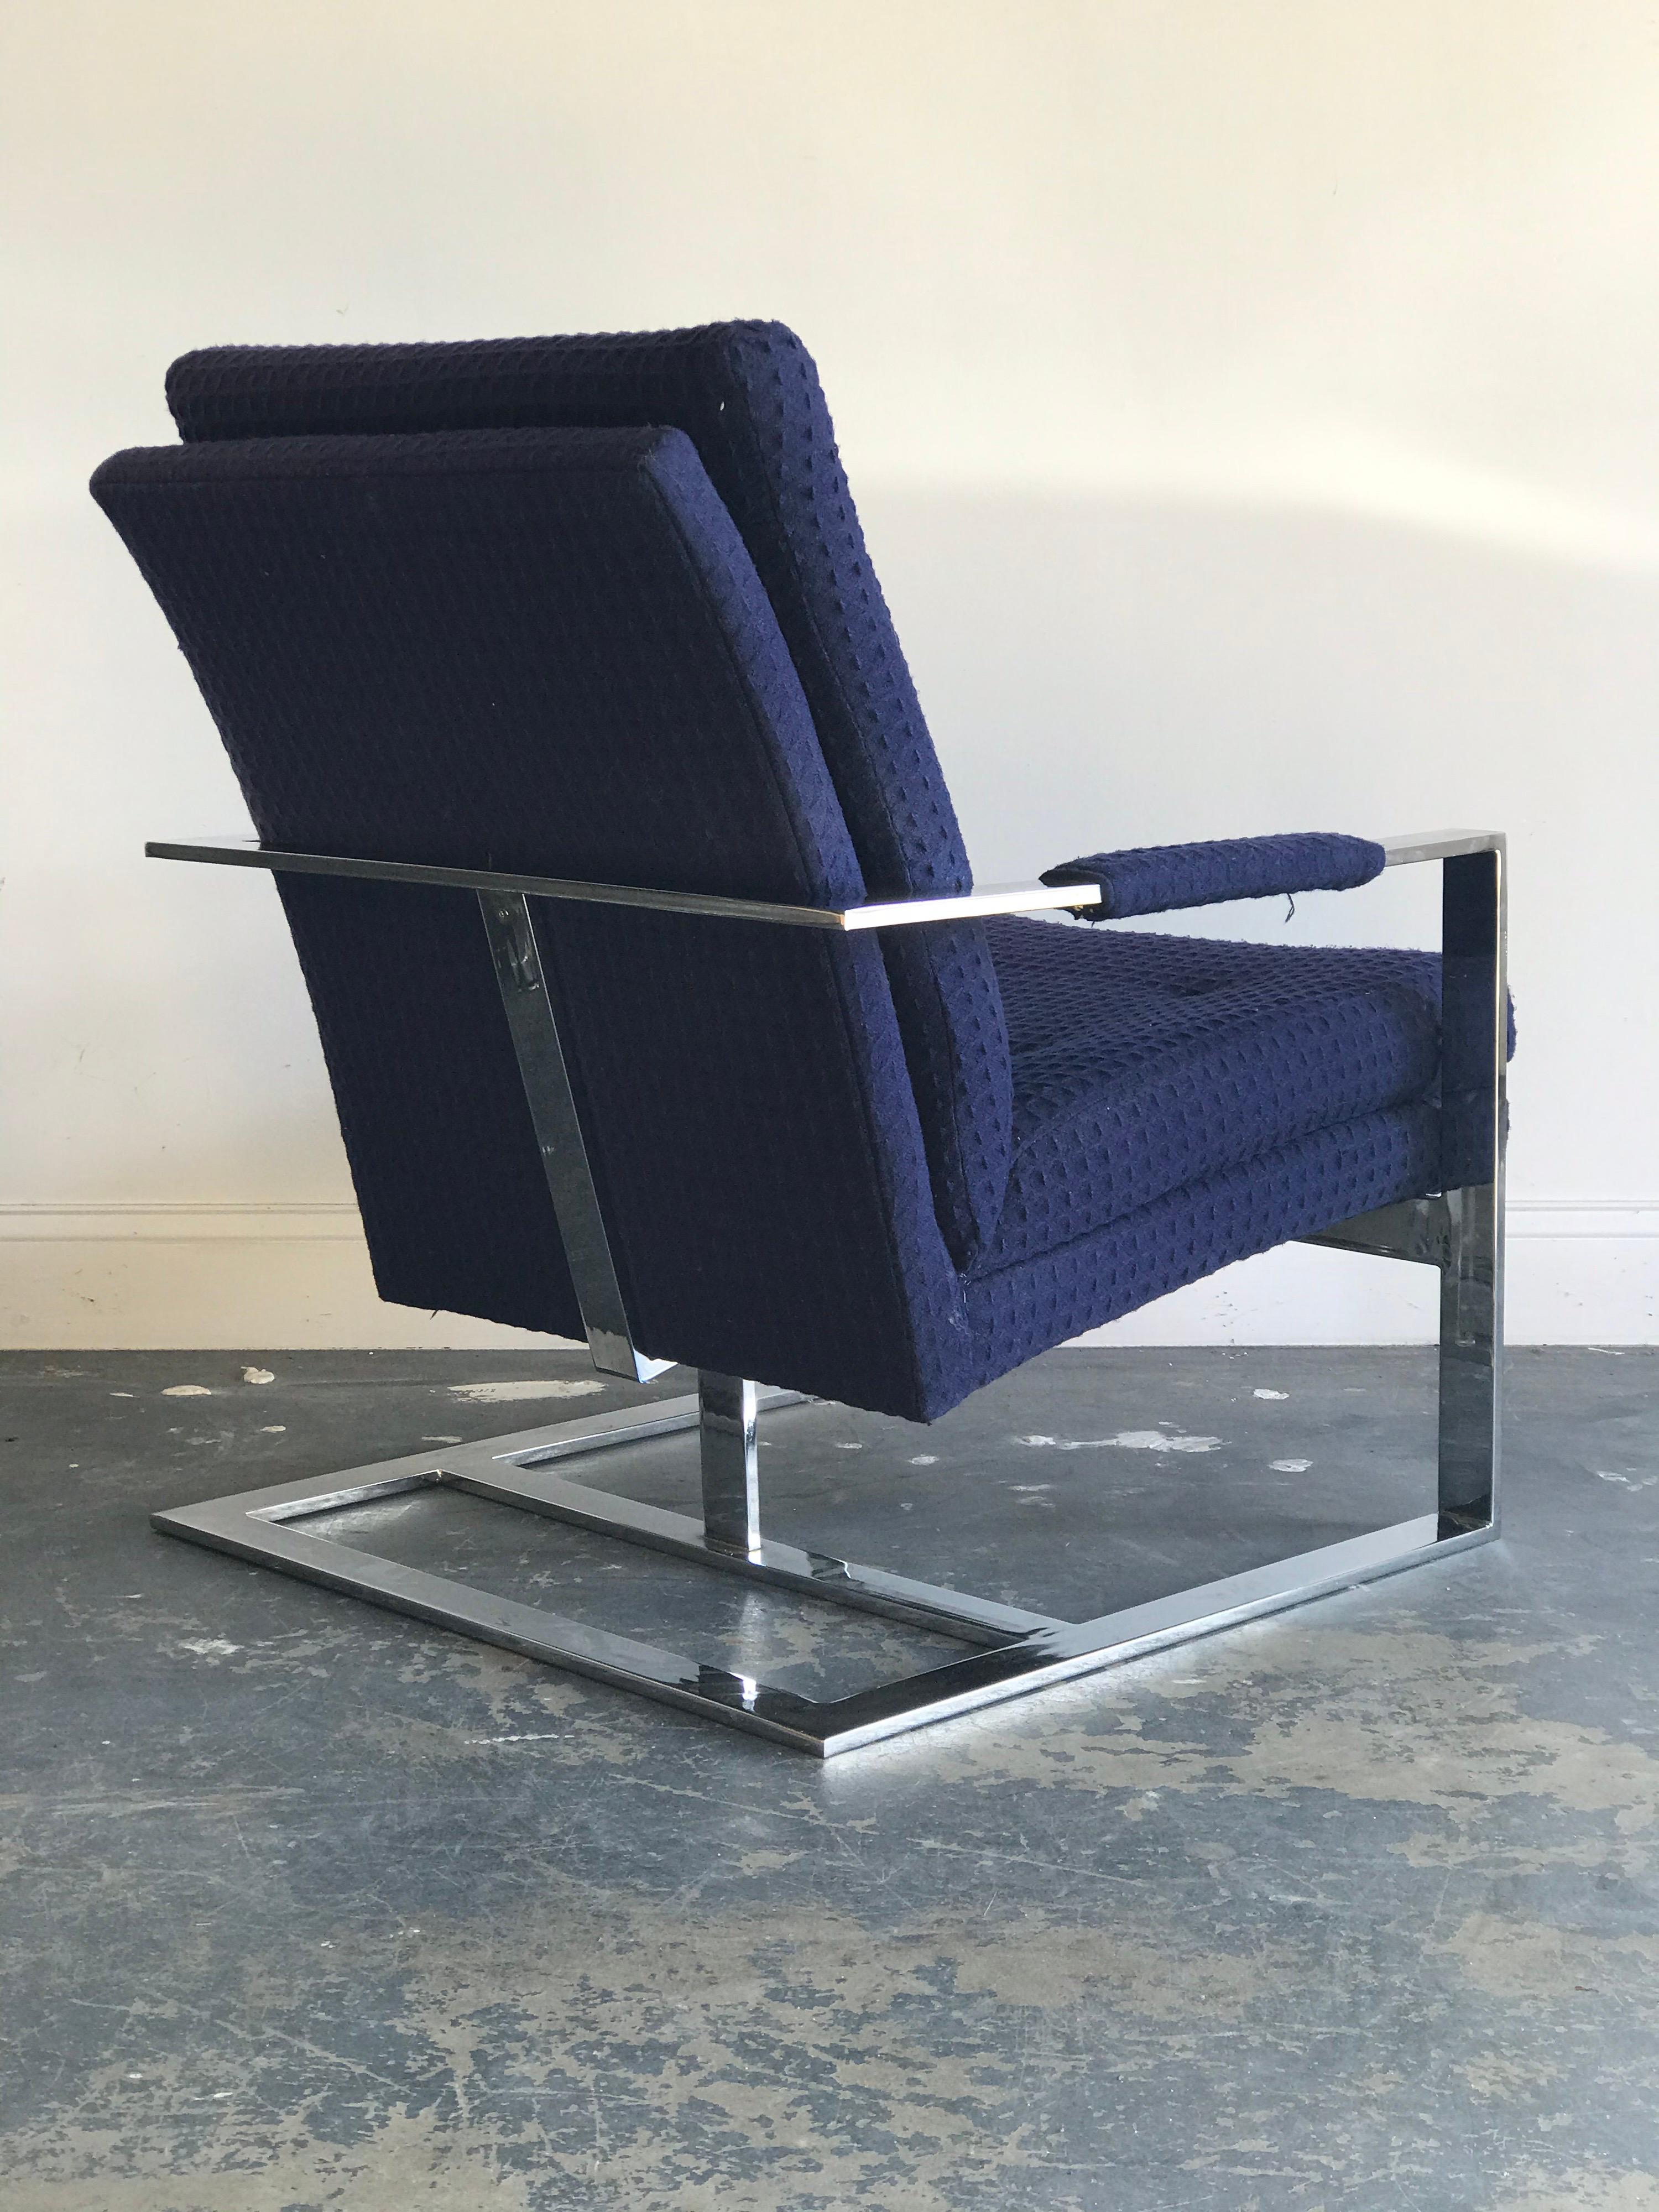 Cantilevered lounge chair designed by Milo Baughman for Thayer Coggin. Very good vintage condition.

Measures: Front of seat height 16.75